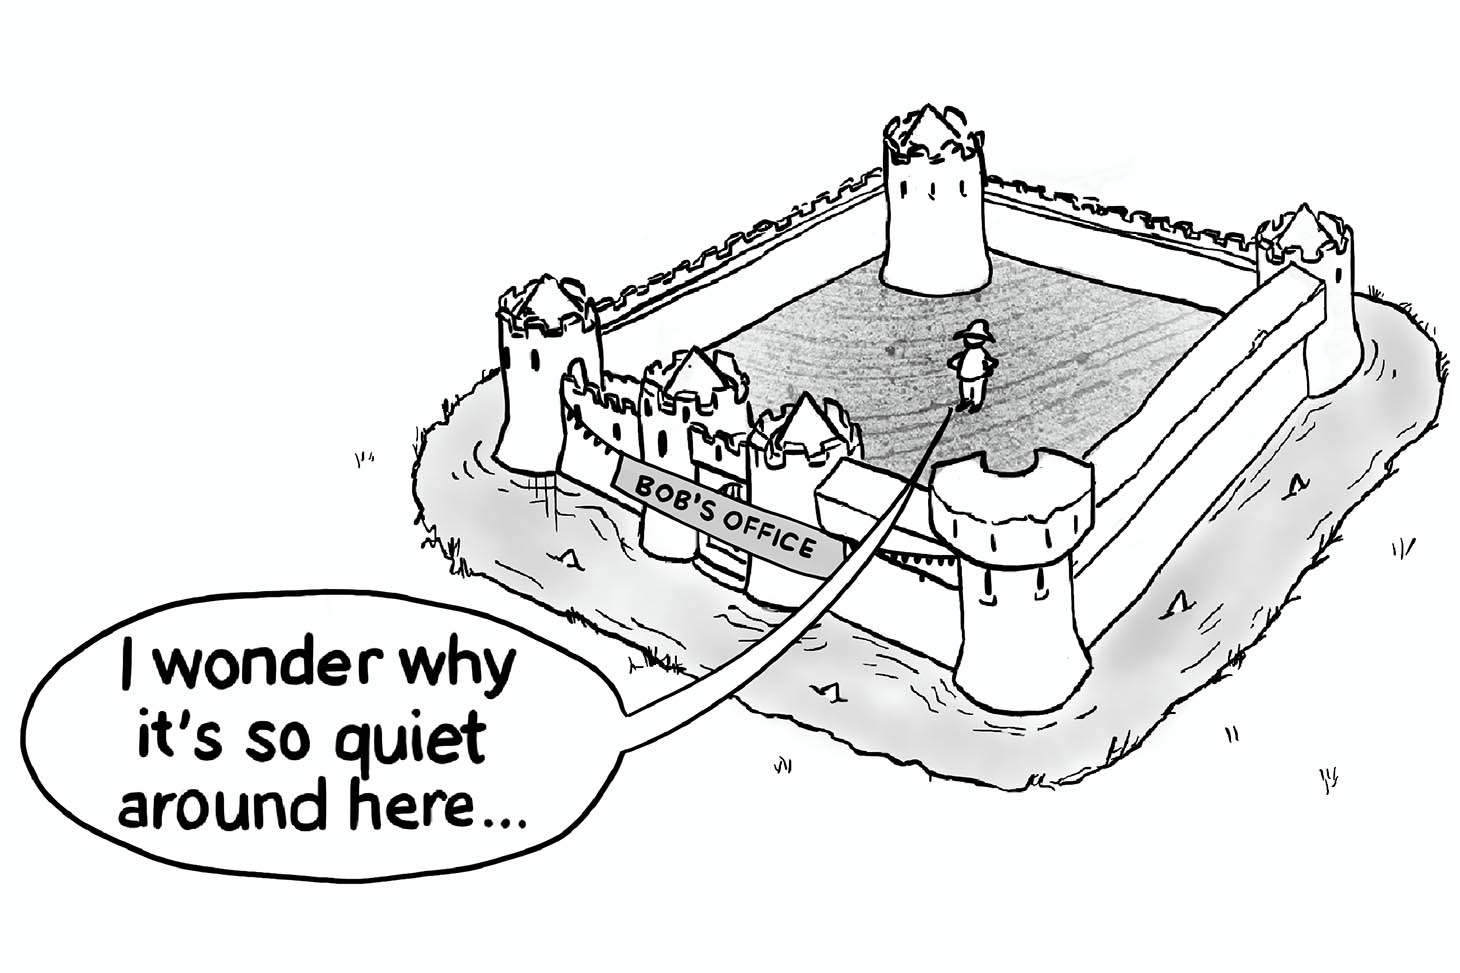 A lone person in a fortified castle, wondering why no one approaches them to talk